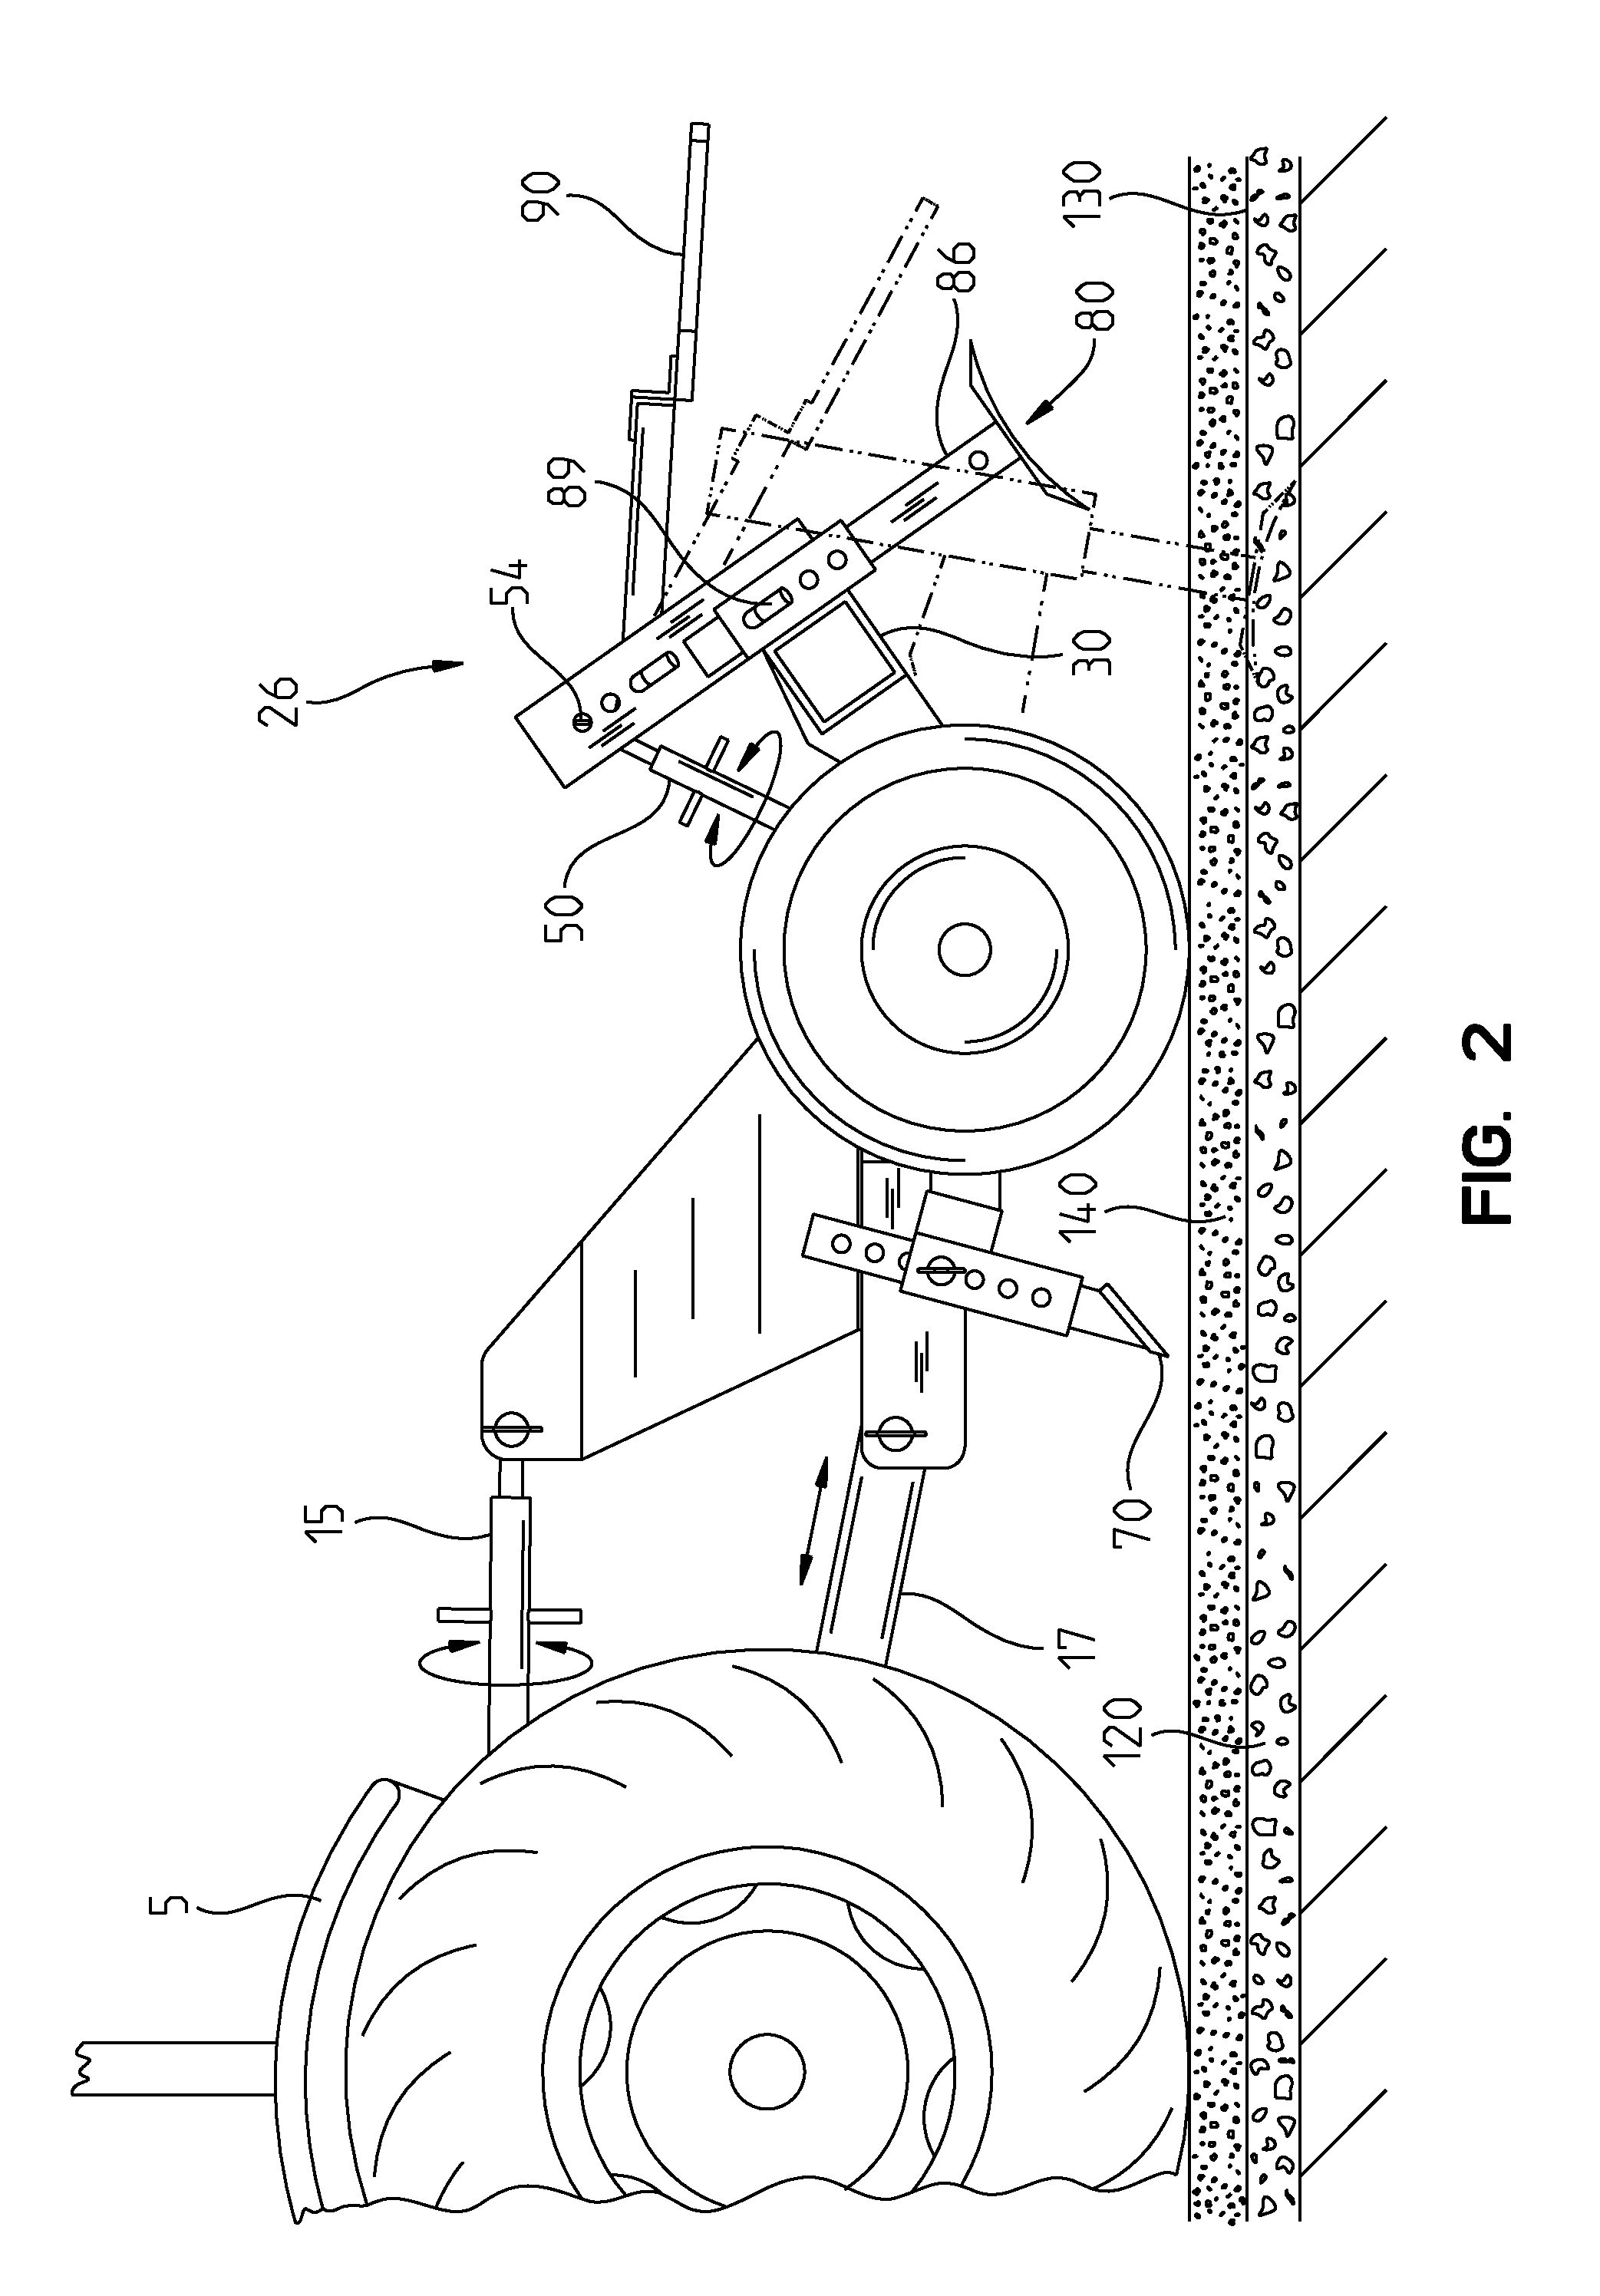 Implement and method for preparing and maintaining dirt arena footing